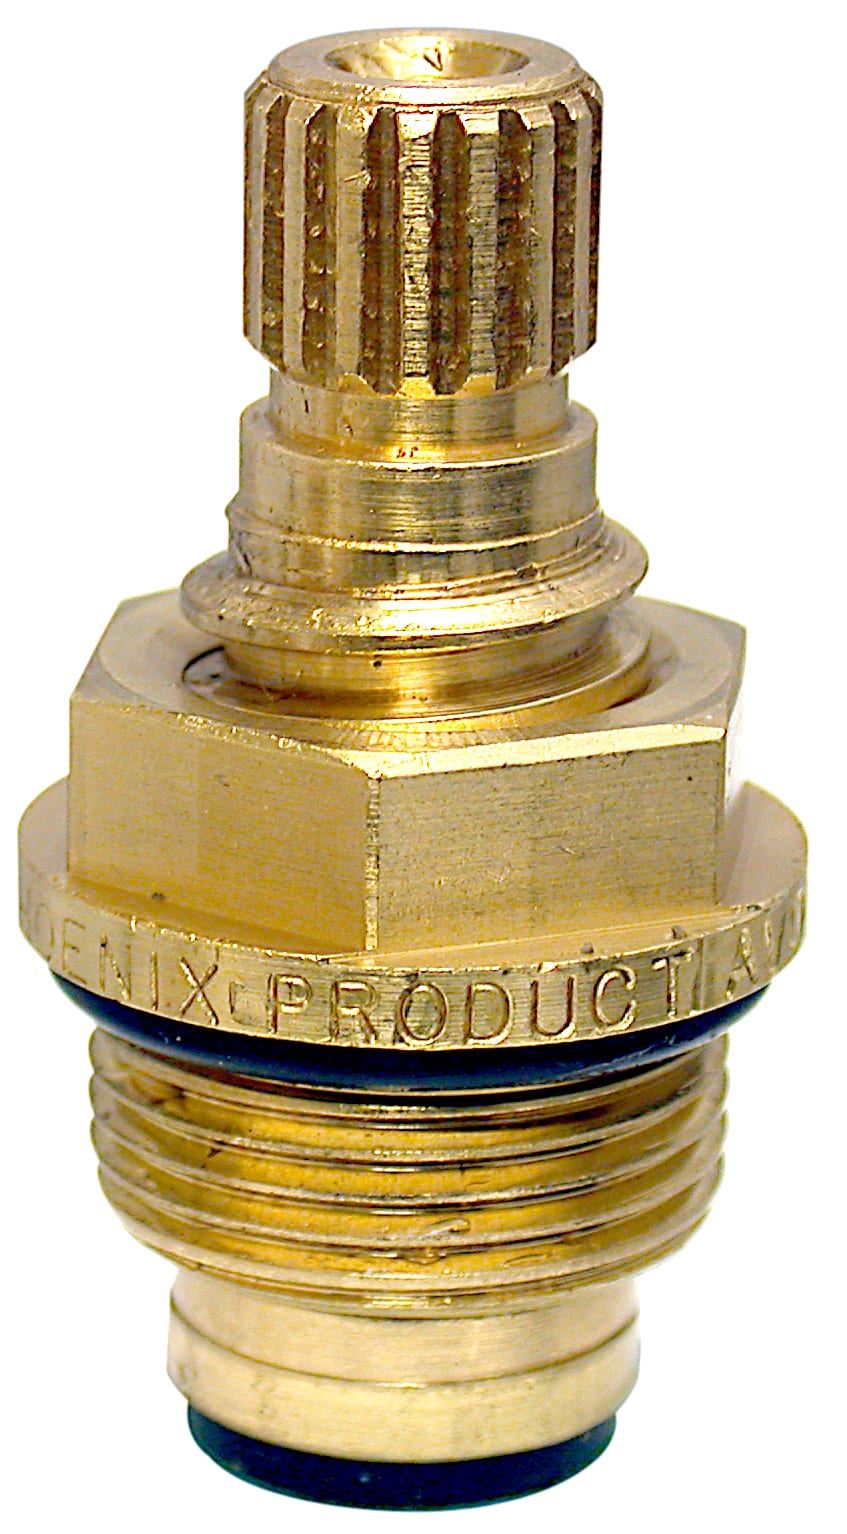 Brass compression stem for Phoenix or Streamway 2-handle tub & shower,  garden tubs and widespread lavatory faucets 